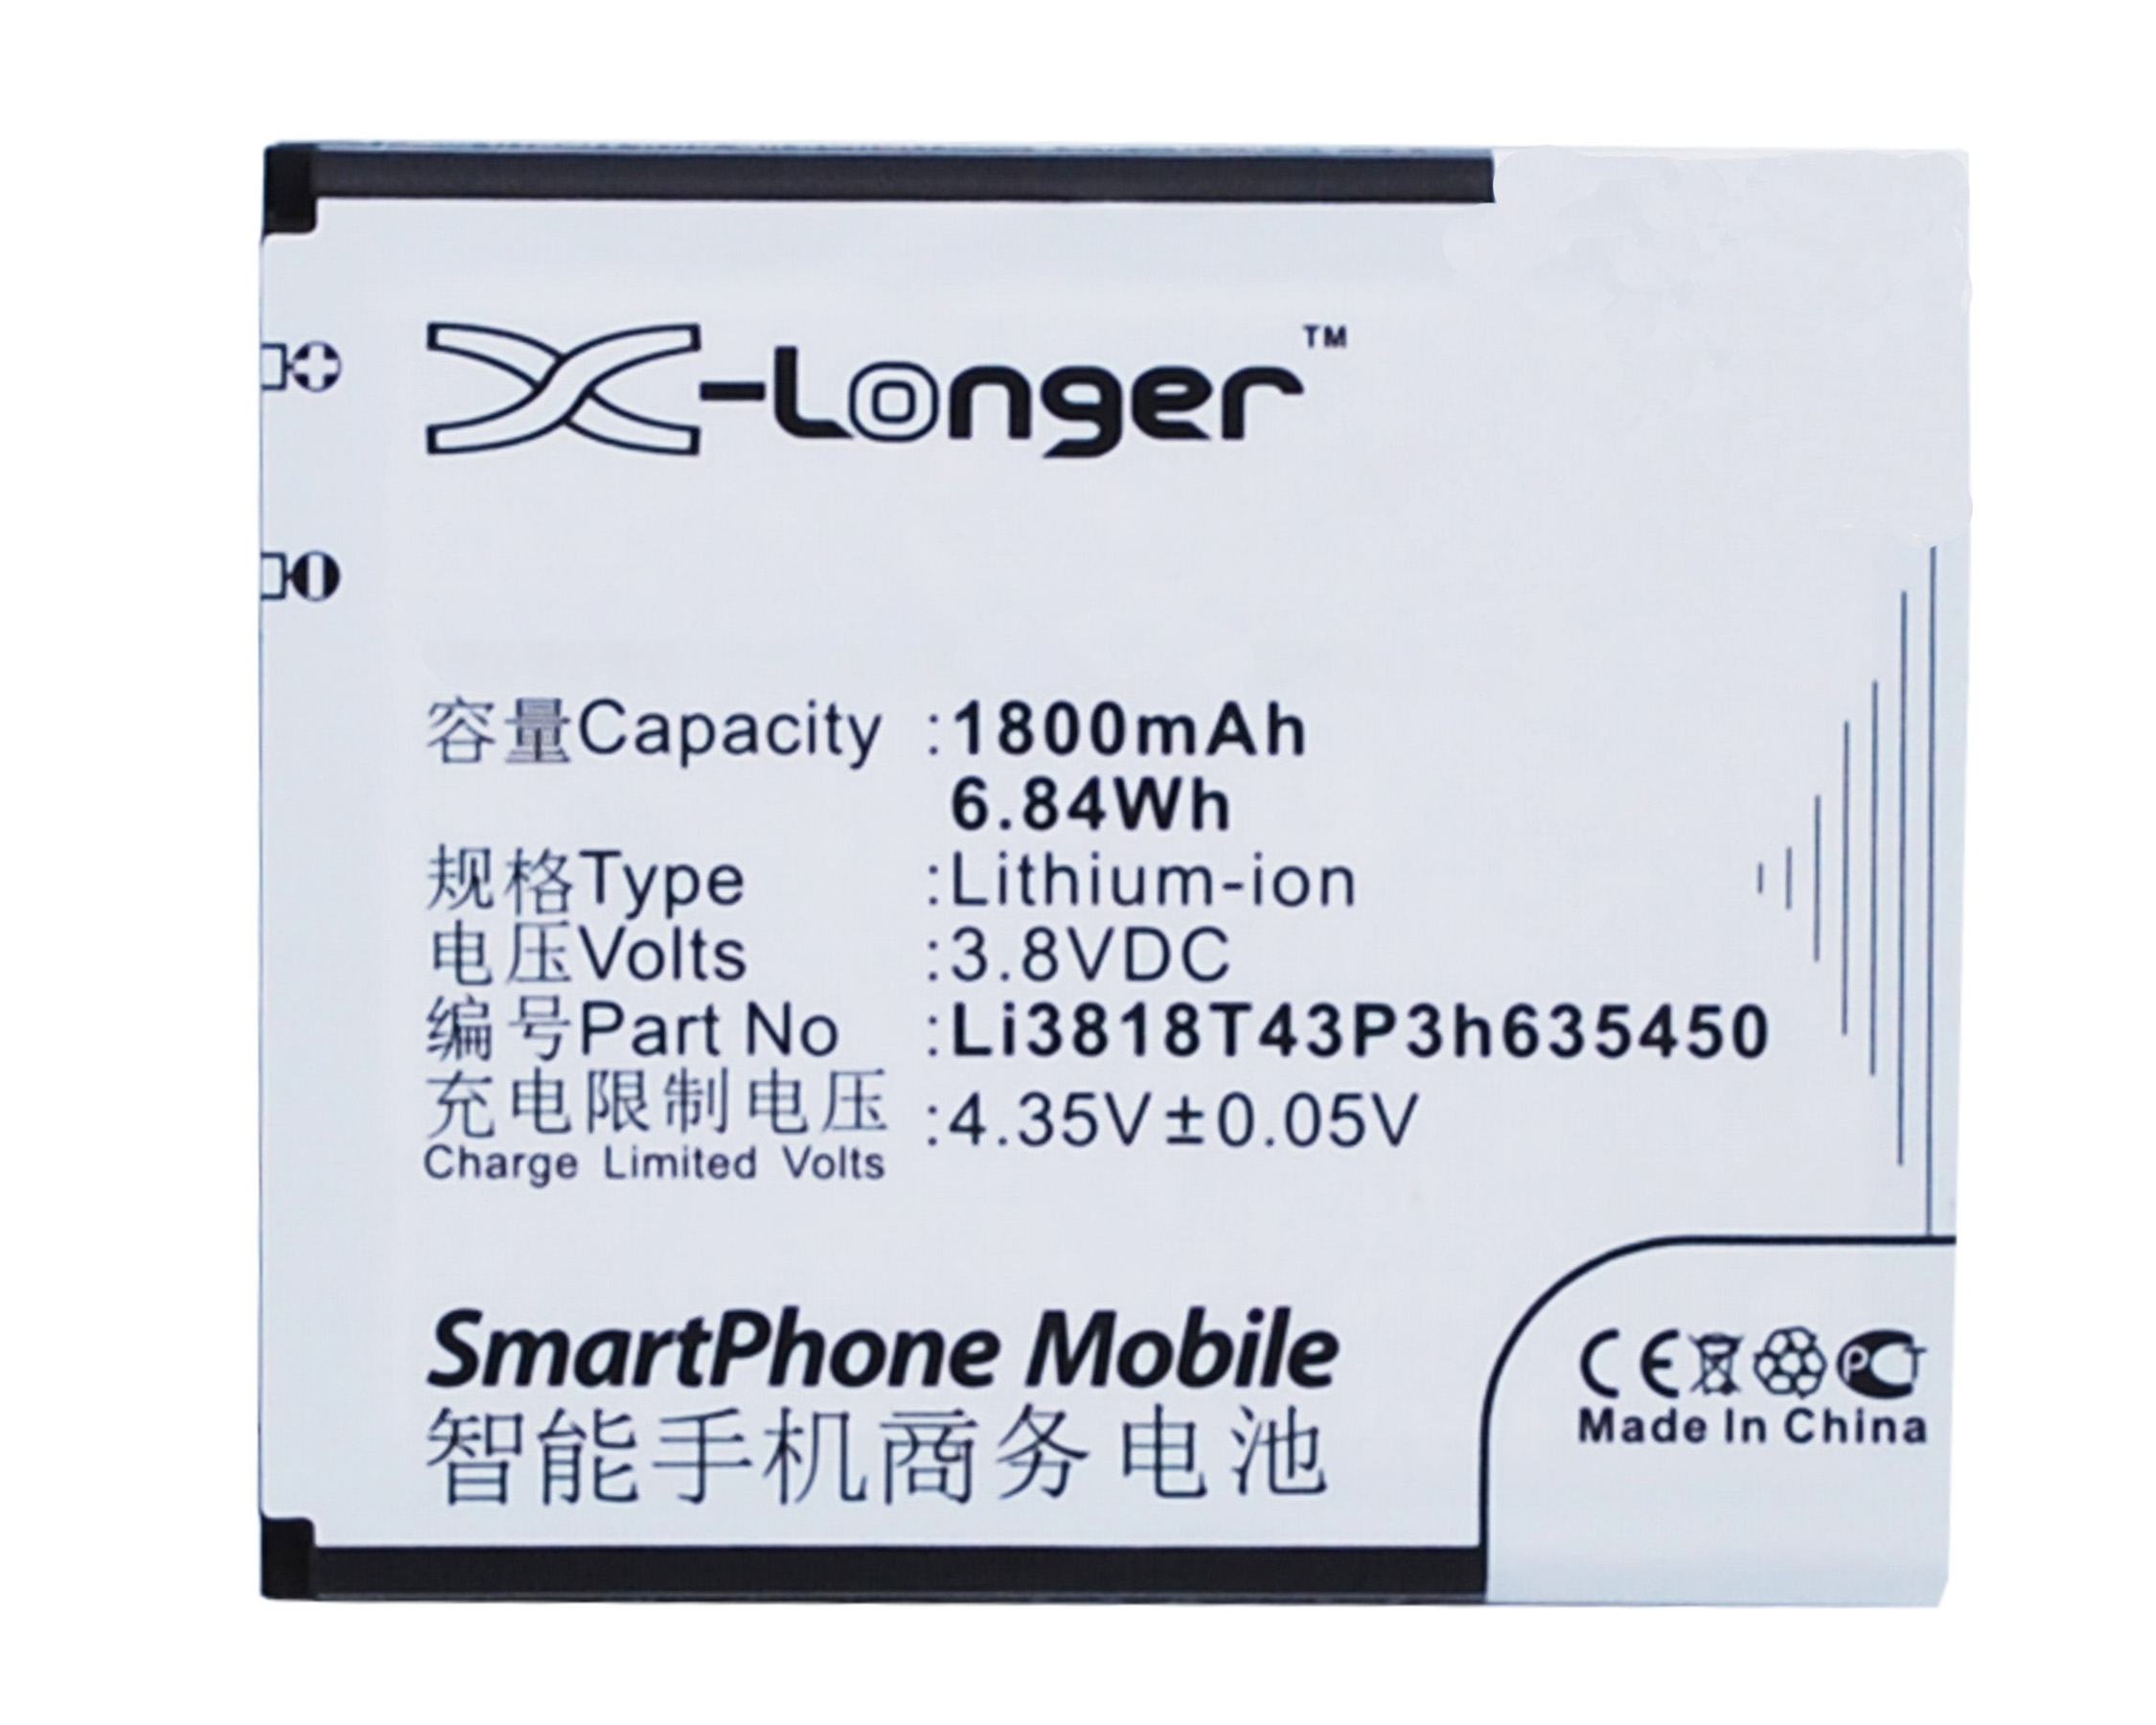 Synergy Digital Battery Compatible With ZTE Li3818T43P3h635450 Cellphone Battery - (Li-Ion, 3.8V, 1800 mAh / 6.84Wh)